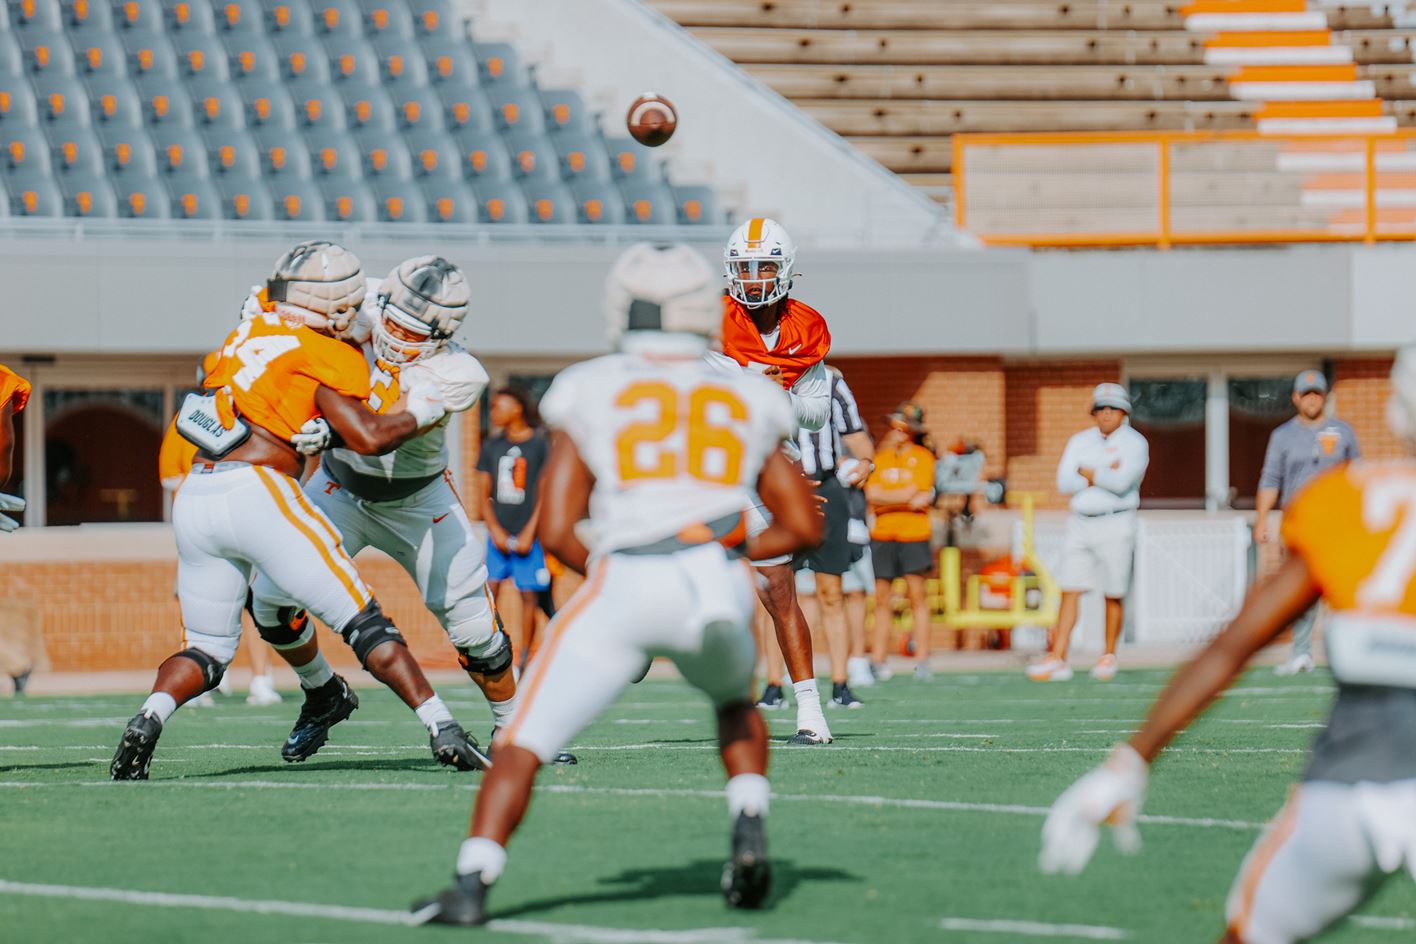 Vols “Clean Up” in 2nd Scrimmage